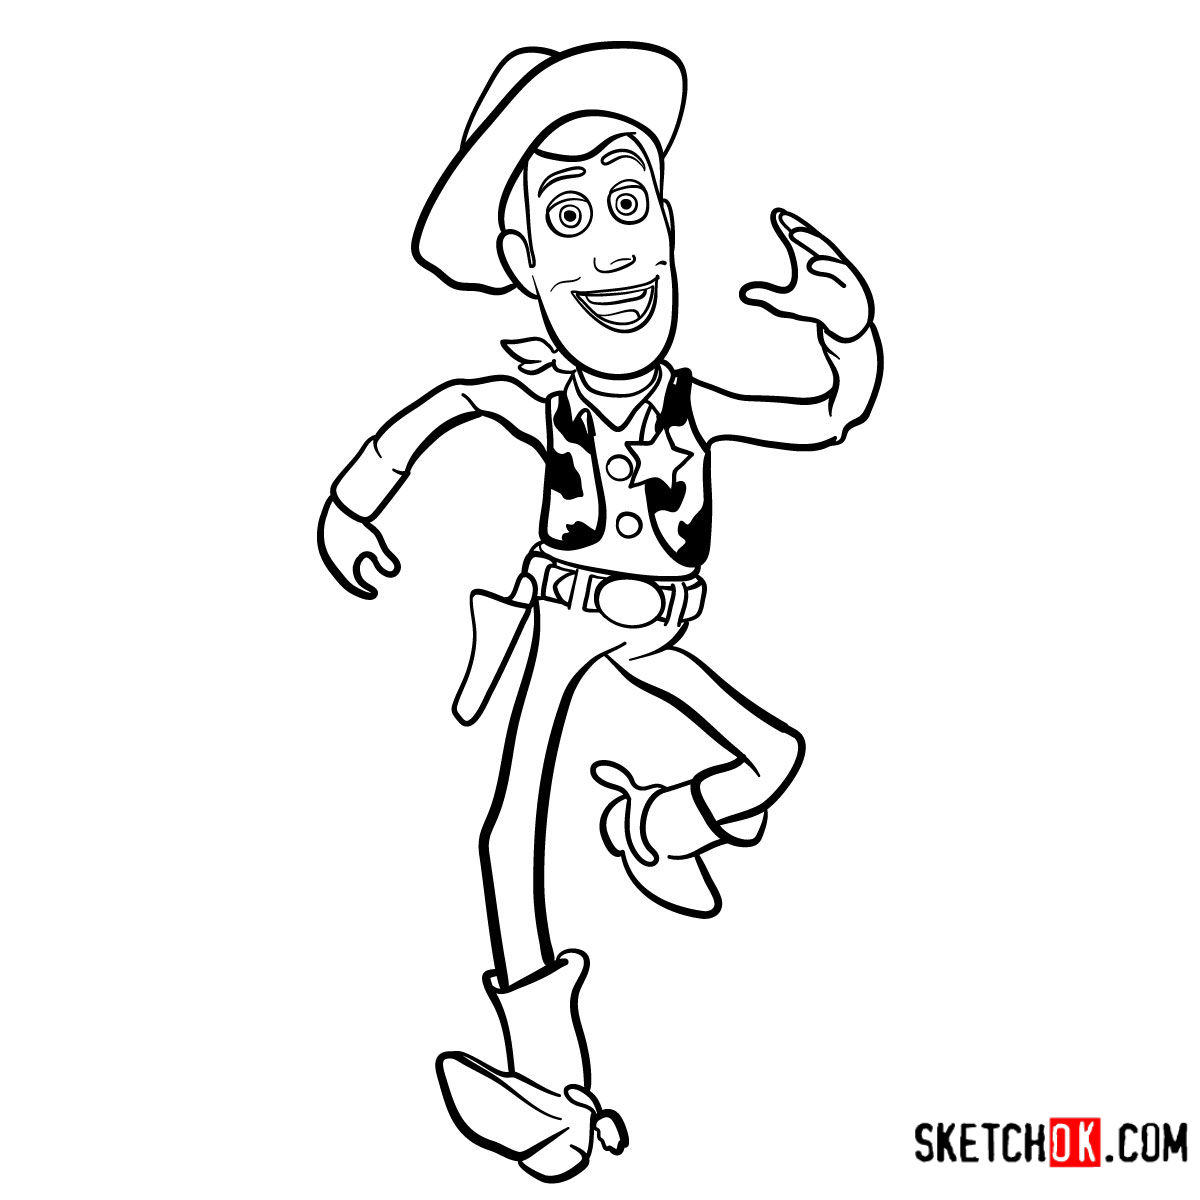 How to draw Sheriff Woody | Toy Story